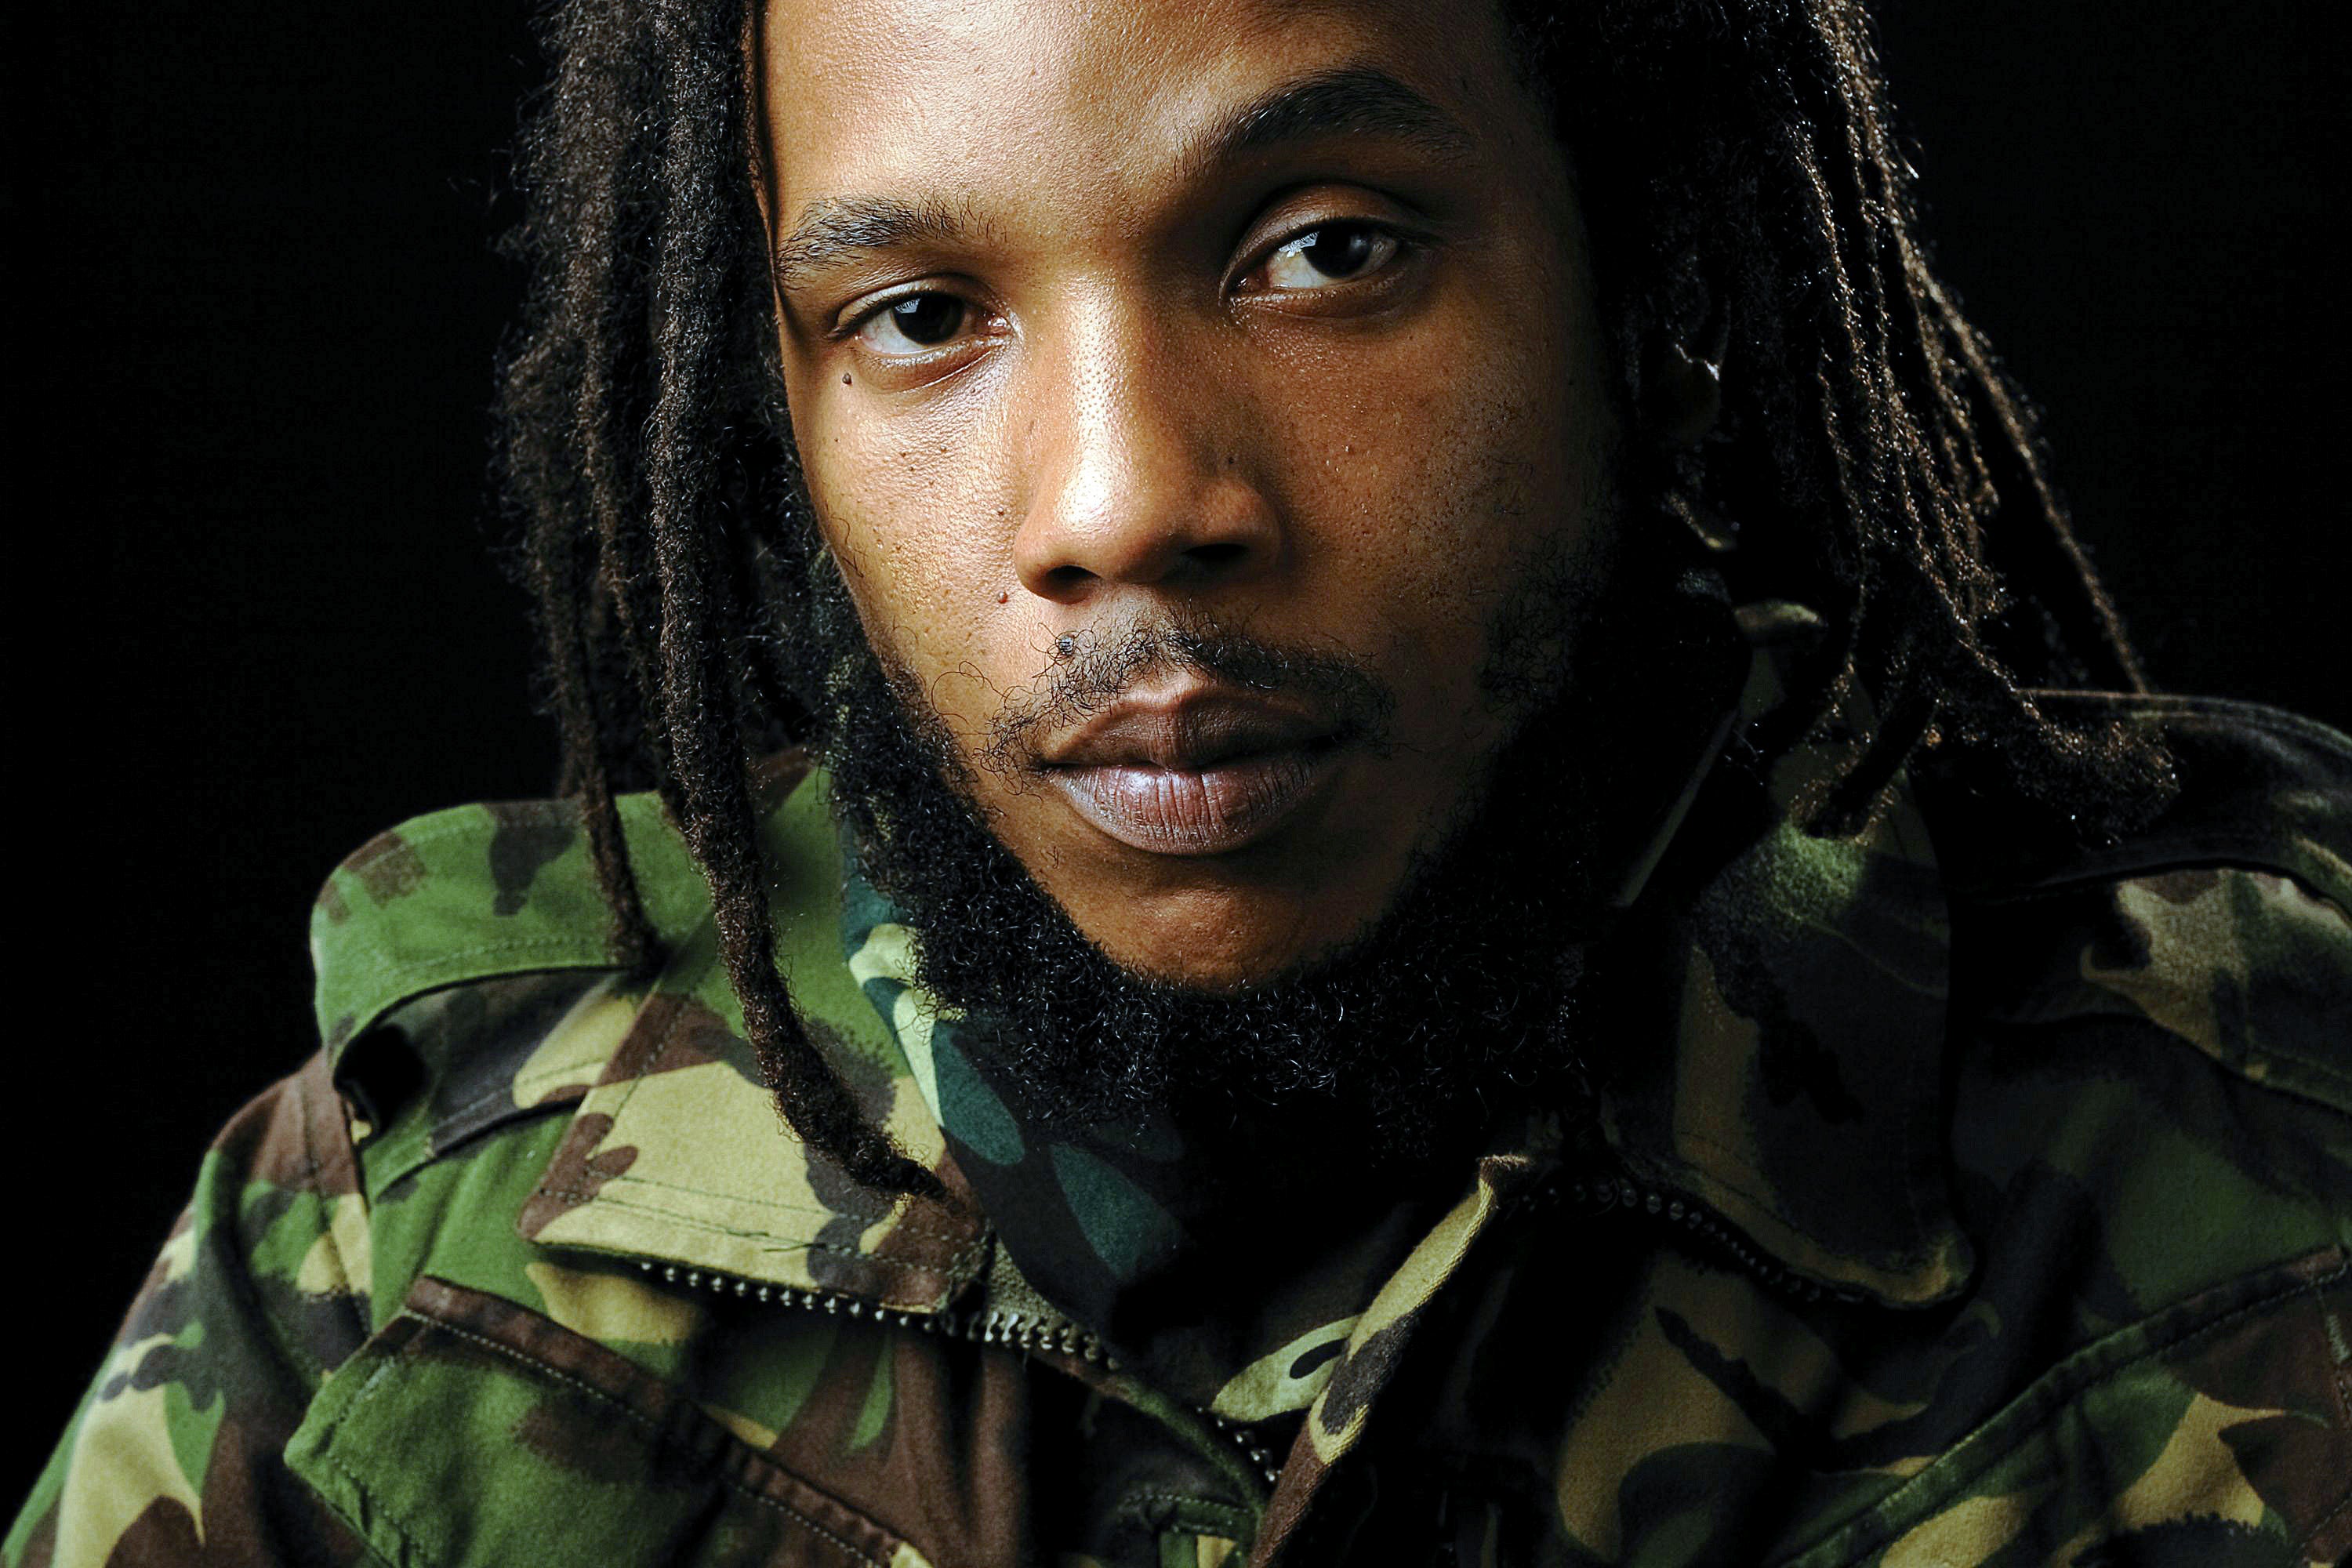 Stephen Marley at The Refinery